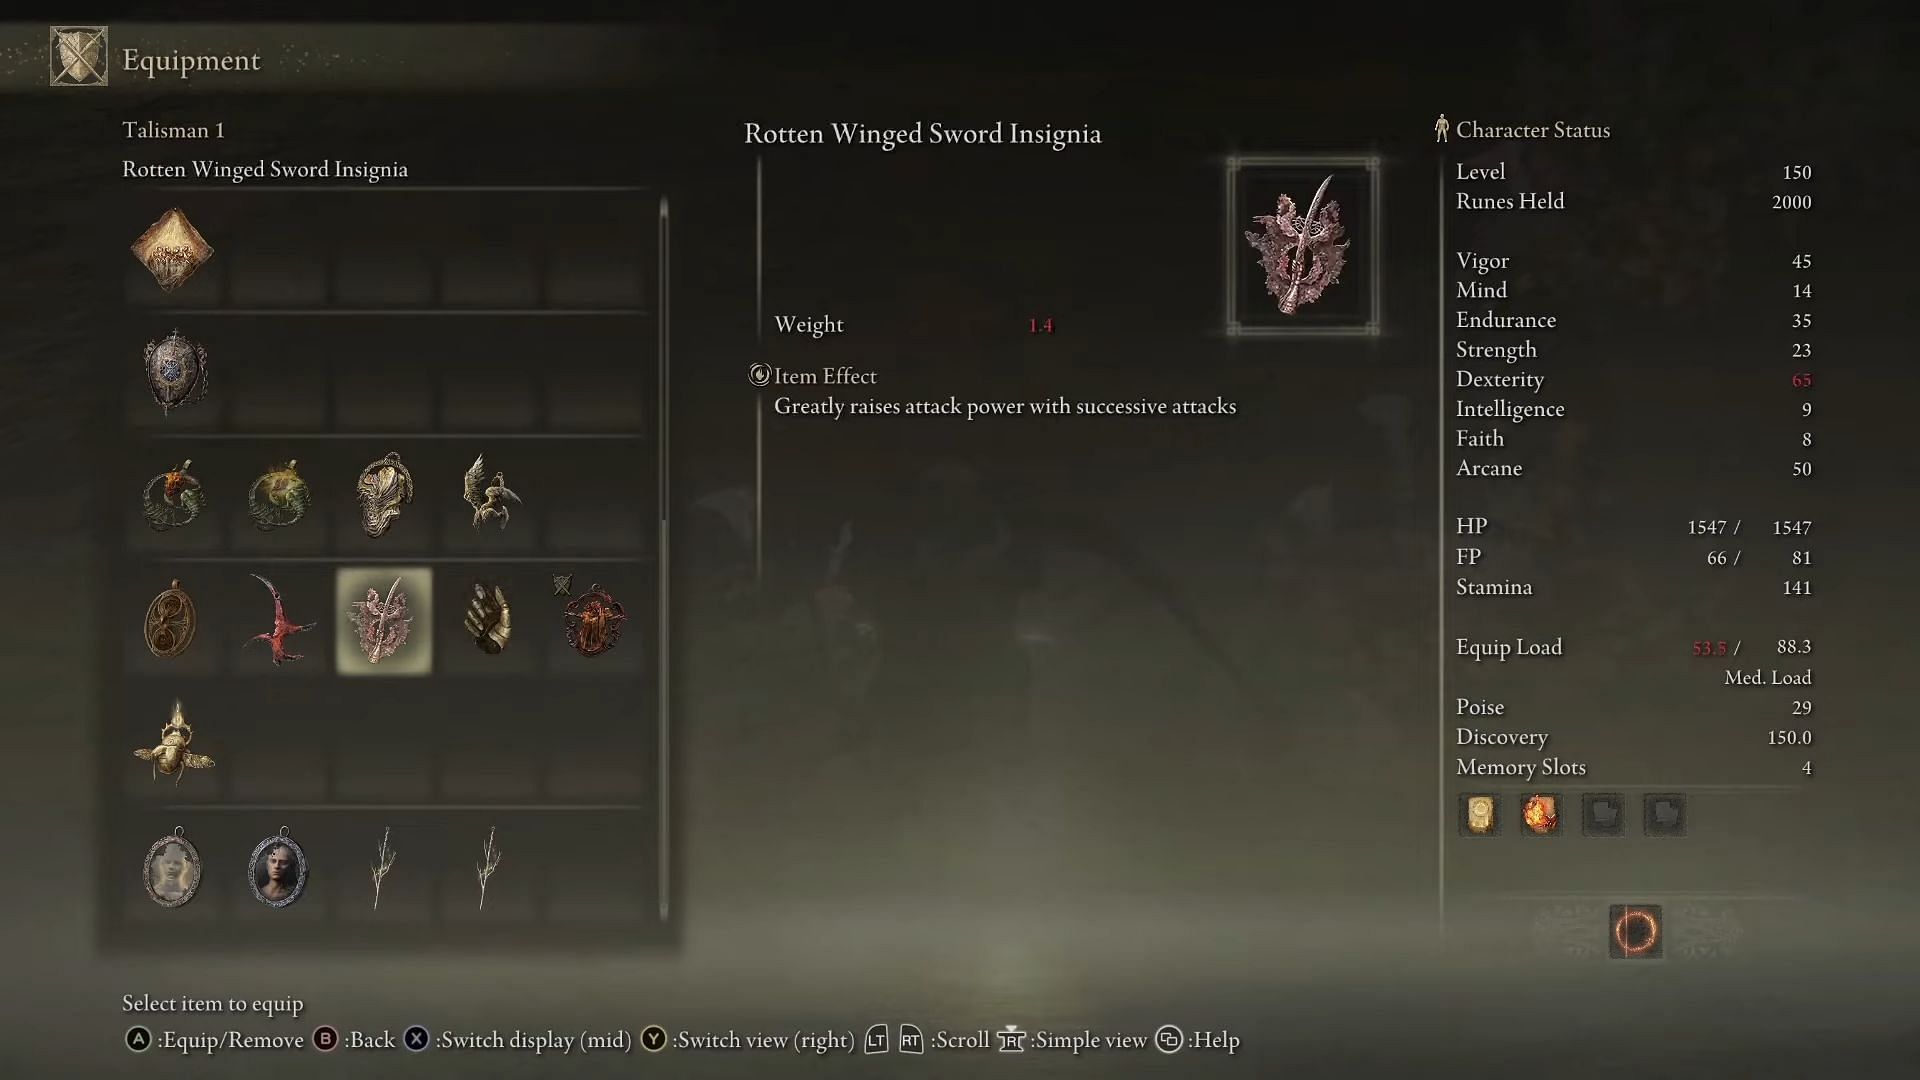 Rotten Winged Sword Insignia is quite good for players using swift attacks in Elden Ring (Image via BDX Ronin Gaming/YouTube)